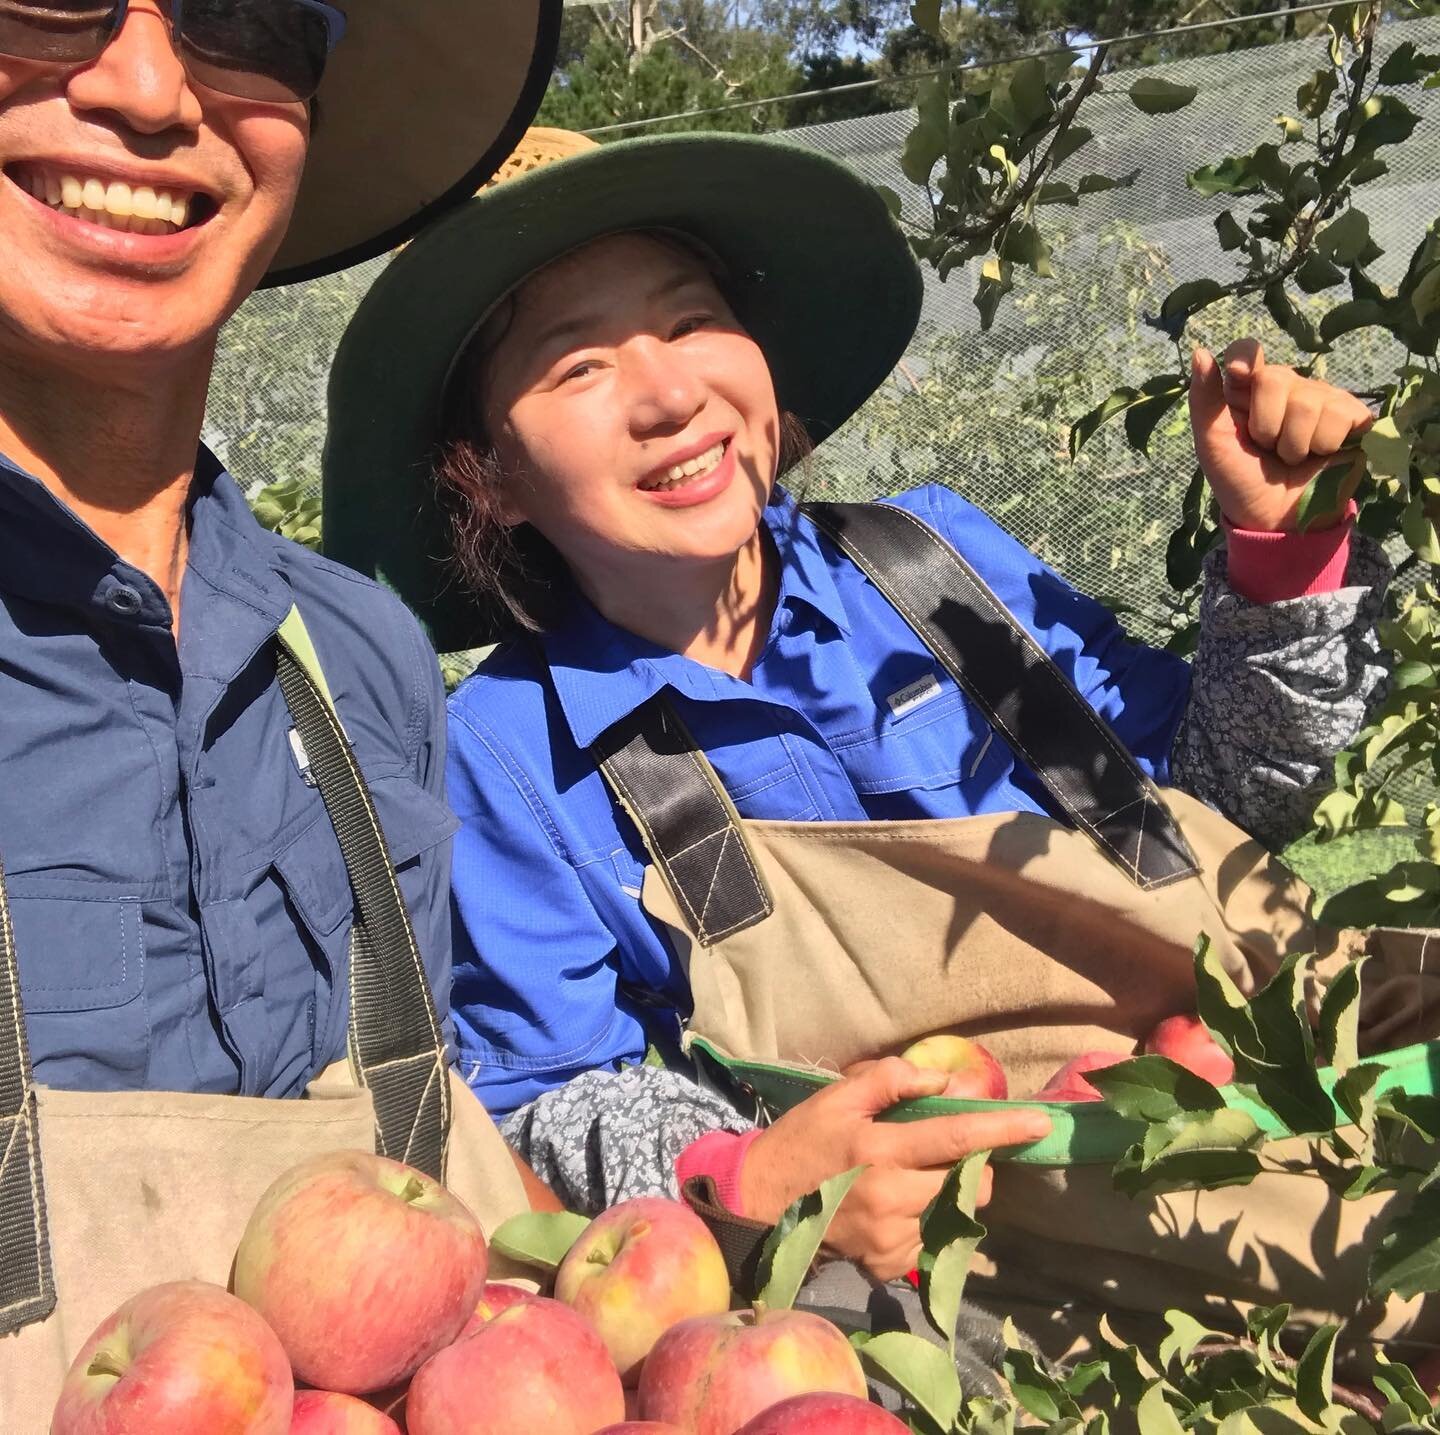 Andrew (papa bear ) and Angela (mum bear ) work every day to tend to all the gorgeous fruit trees on the orchard 🌳🍎🍒 . But they say they are happier than they have ever been. They believe work is a blessing and finding work that has purpose is the